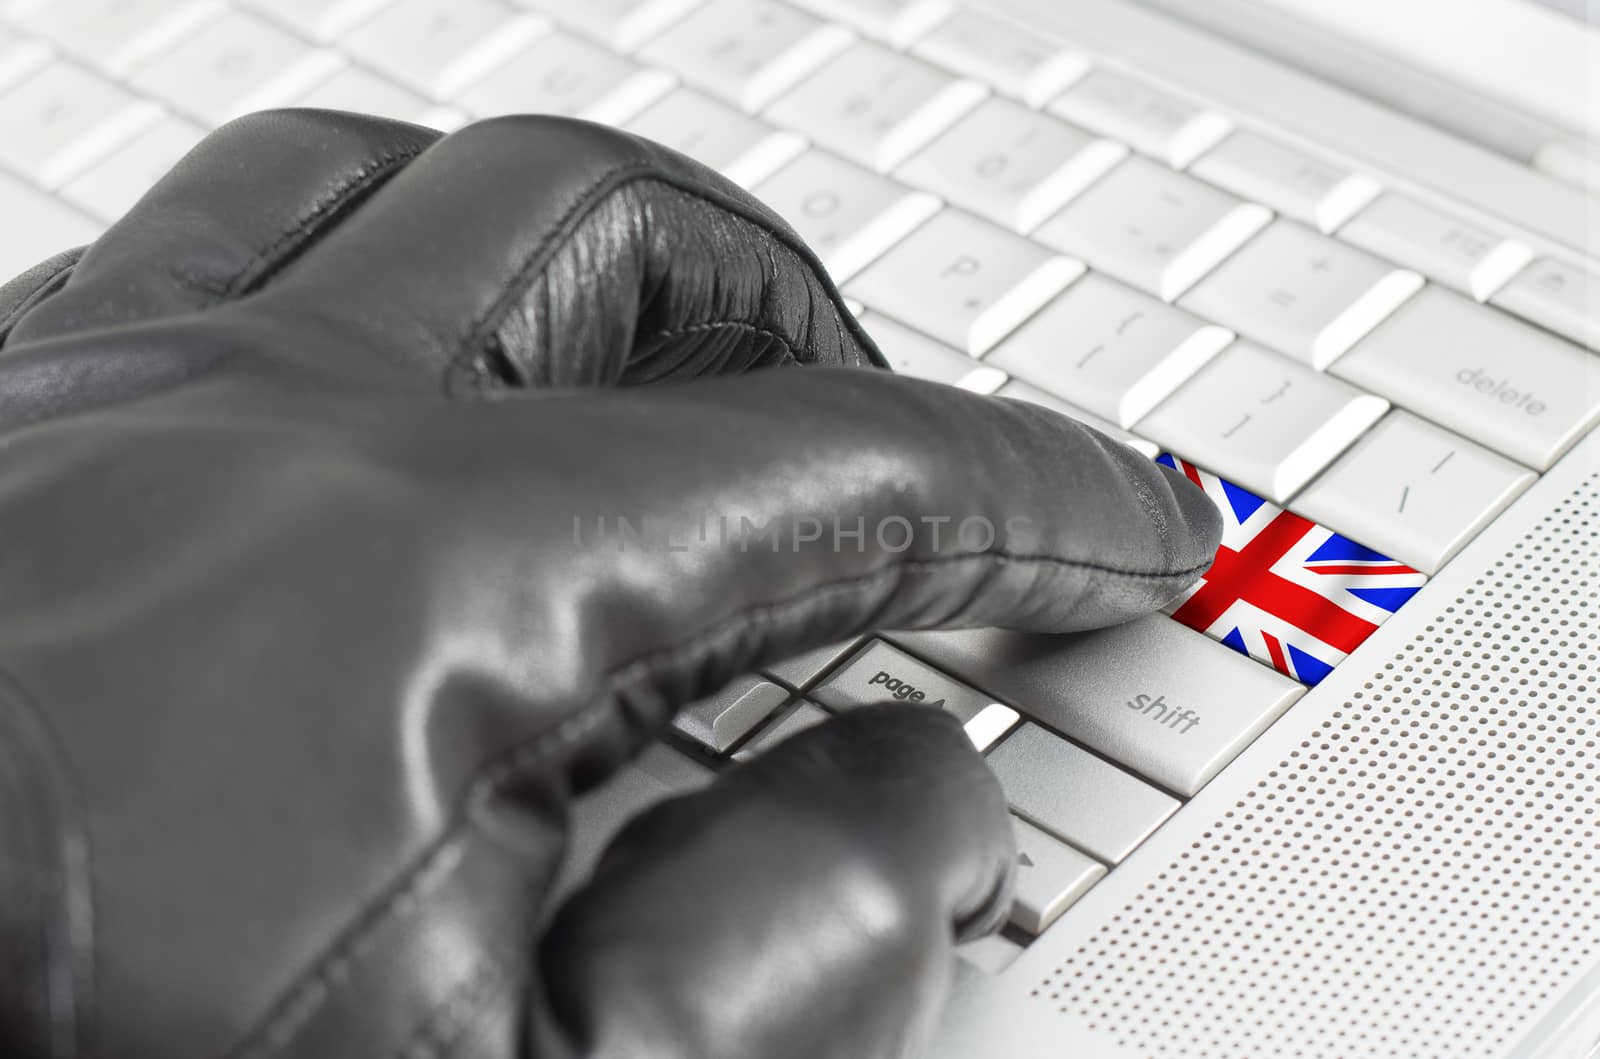 Hacking UK concept with hand wearing black leather glove pressing enter key with flag overlaid